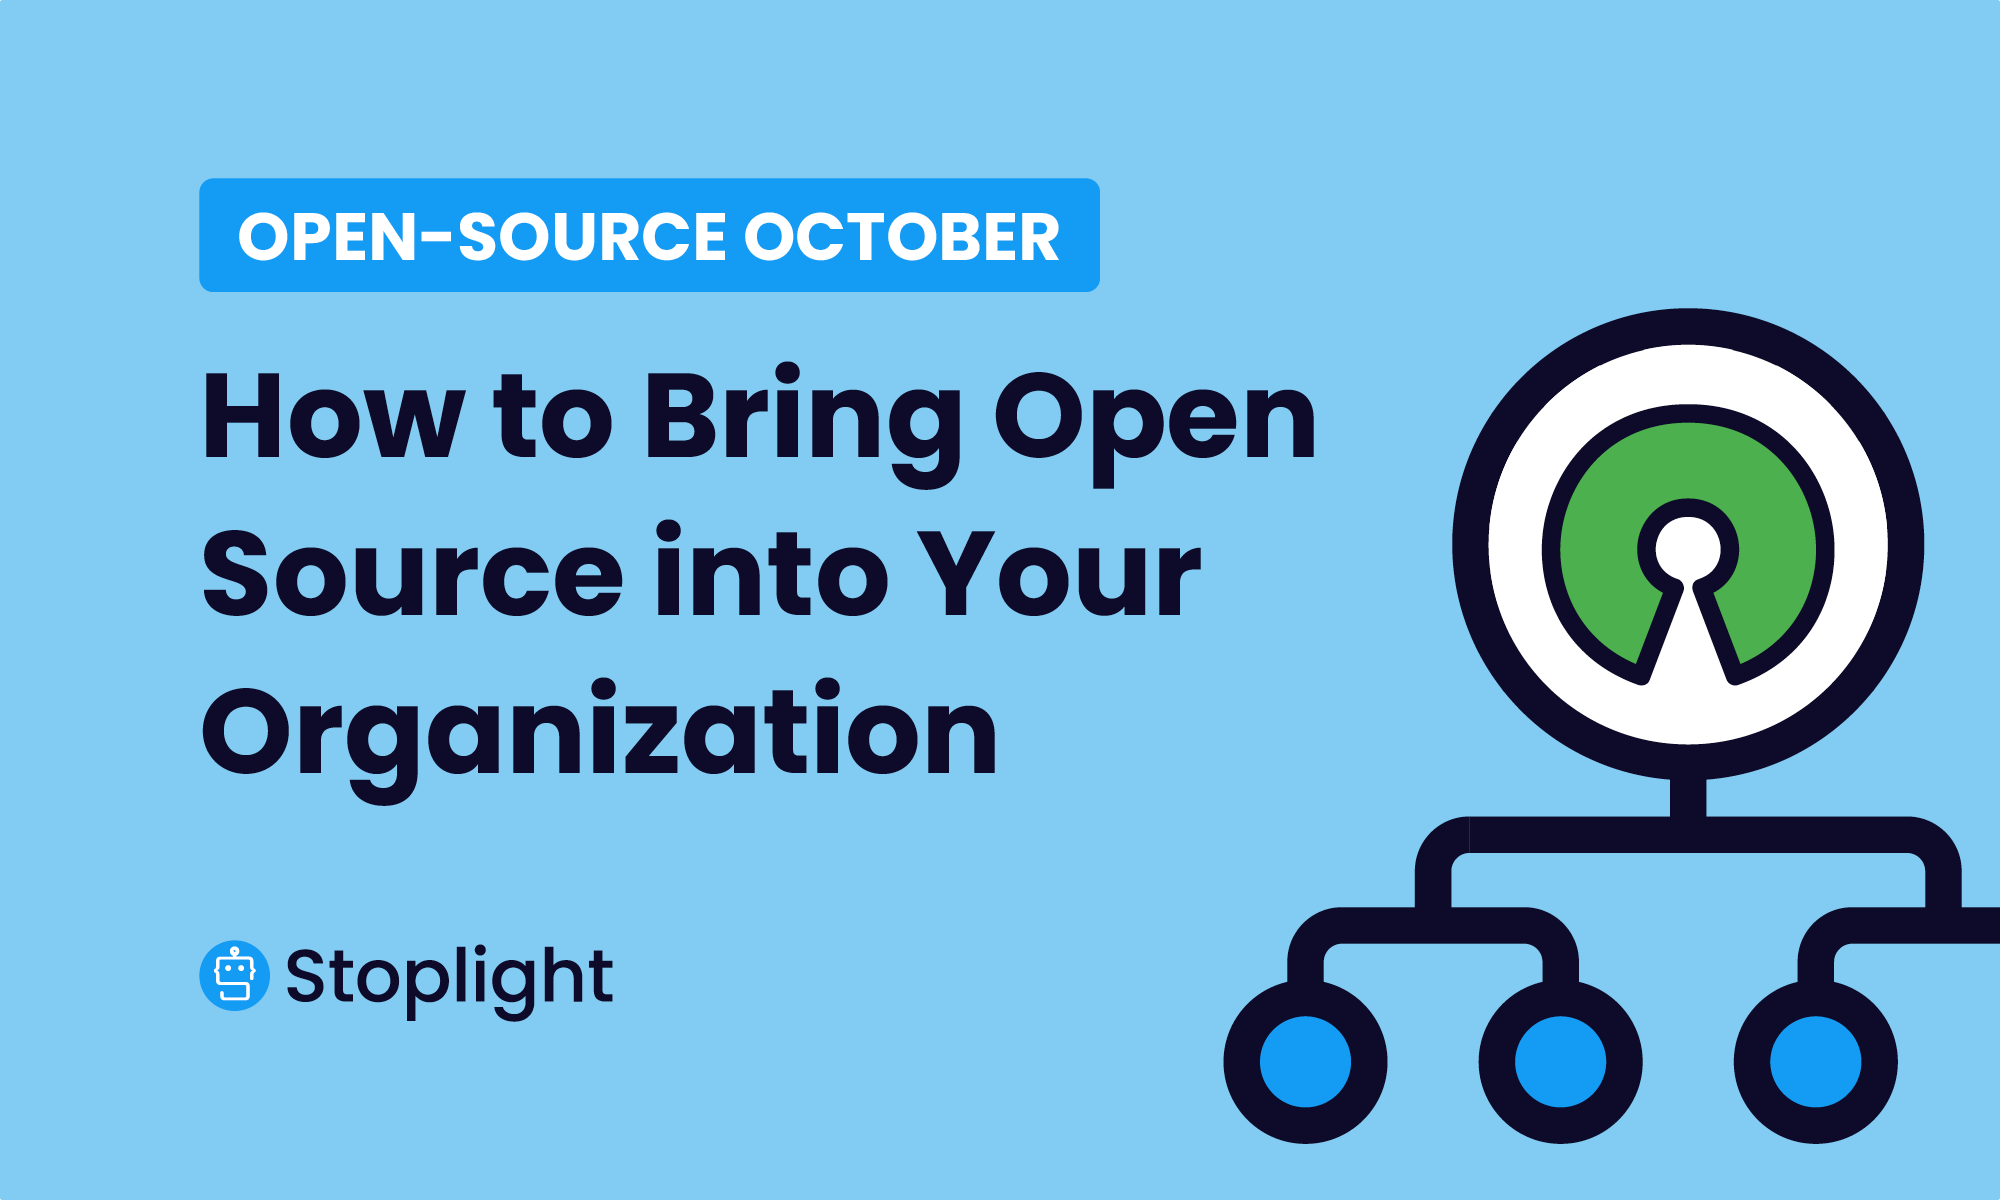 Open-Source October: How to Bring Open-Source into Your Organization